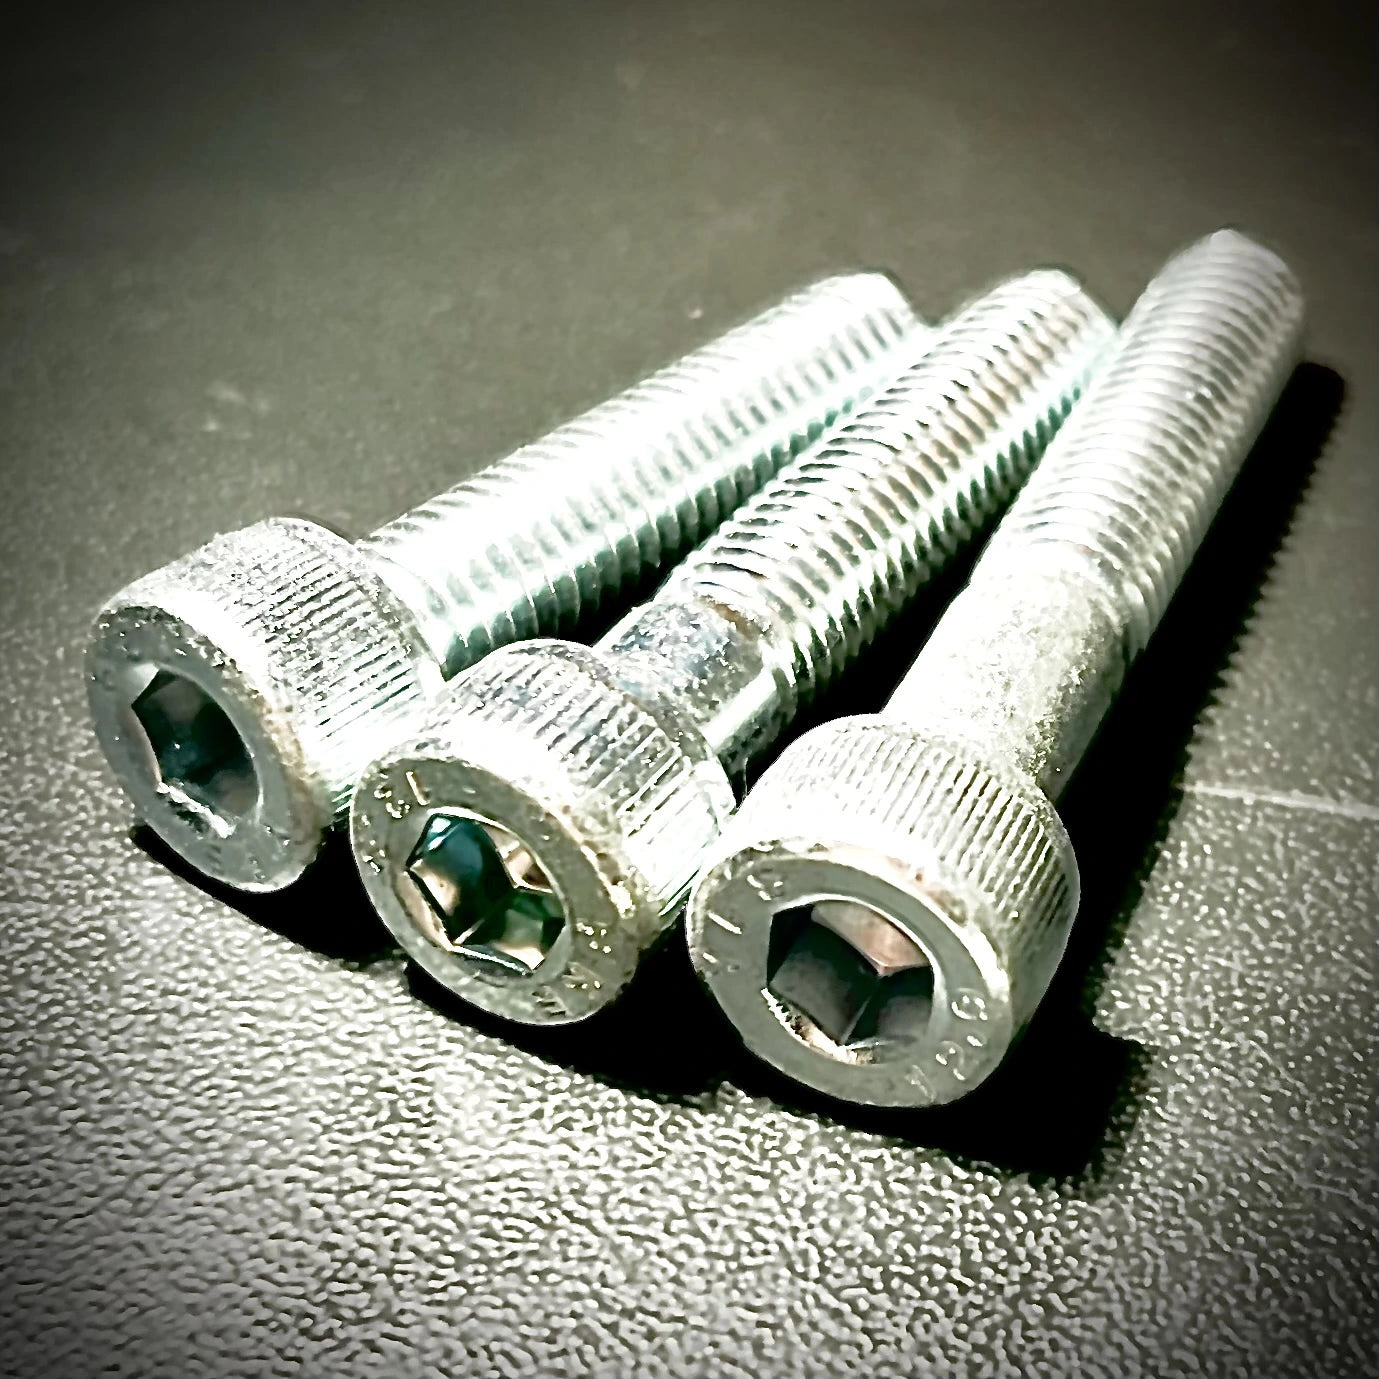 M12 x Over 110mm Socket Cap Screw High Tensile 12.9 BZP DIN912 - Fixaball Ltd. Fixings and Fasteners UK